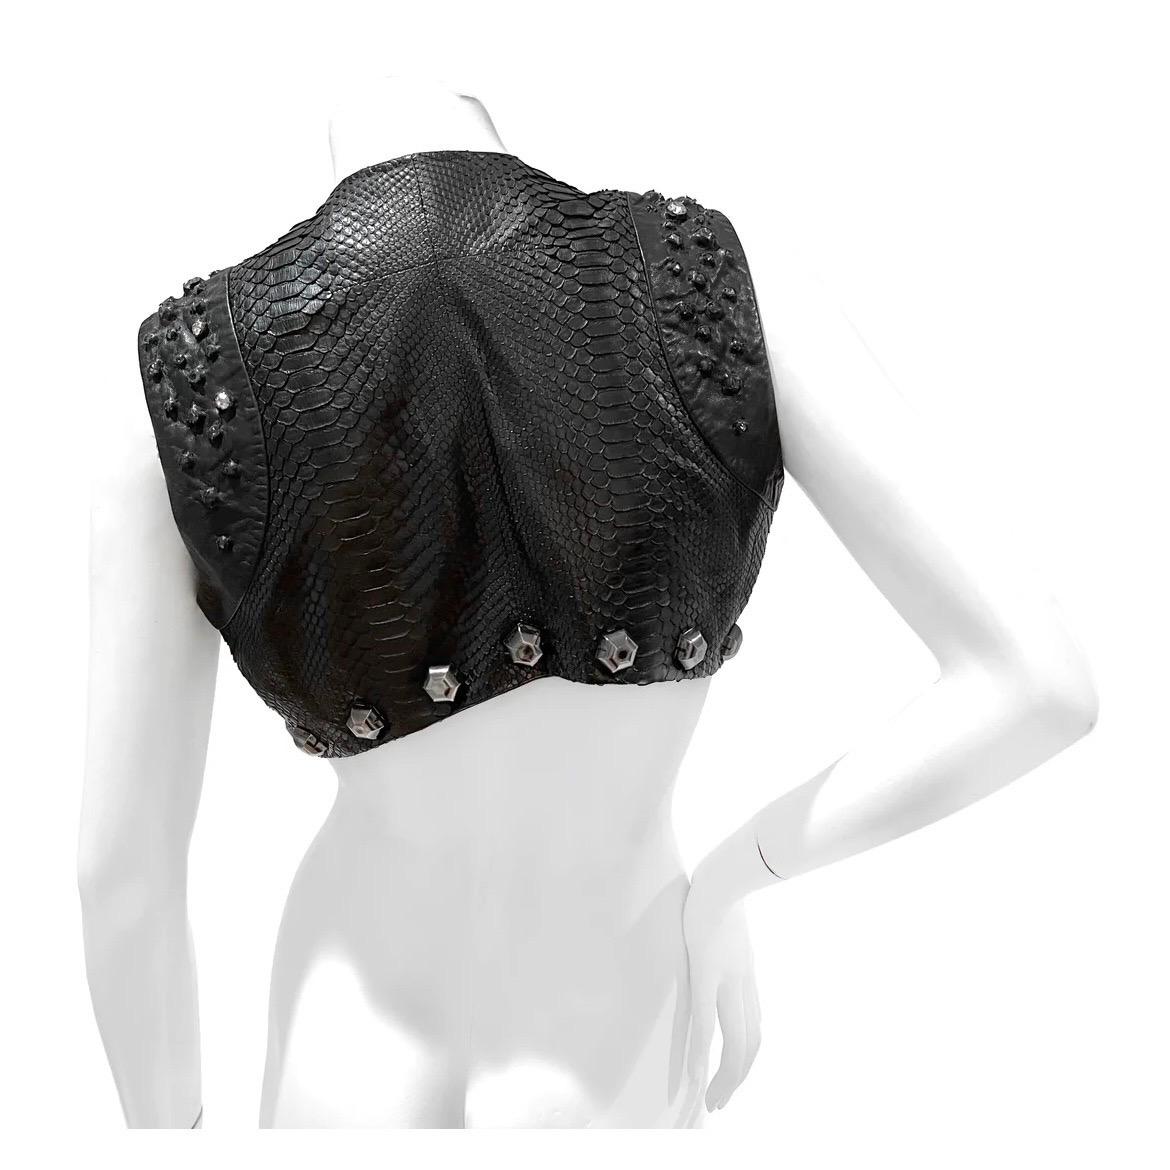 Snake Studded Crystal Embellished Mini Vest by Givenchy
Black
Mini vest style
Snake skin
Large stud and crystal embellishment
Front of vest is longer than the back 
Snake leather
Great Condition; Preloved with slight weathering on the leather. Wear